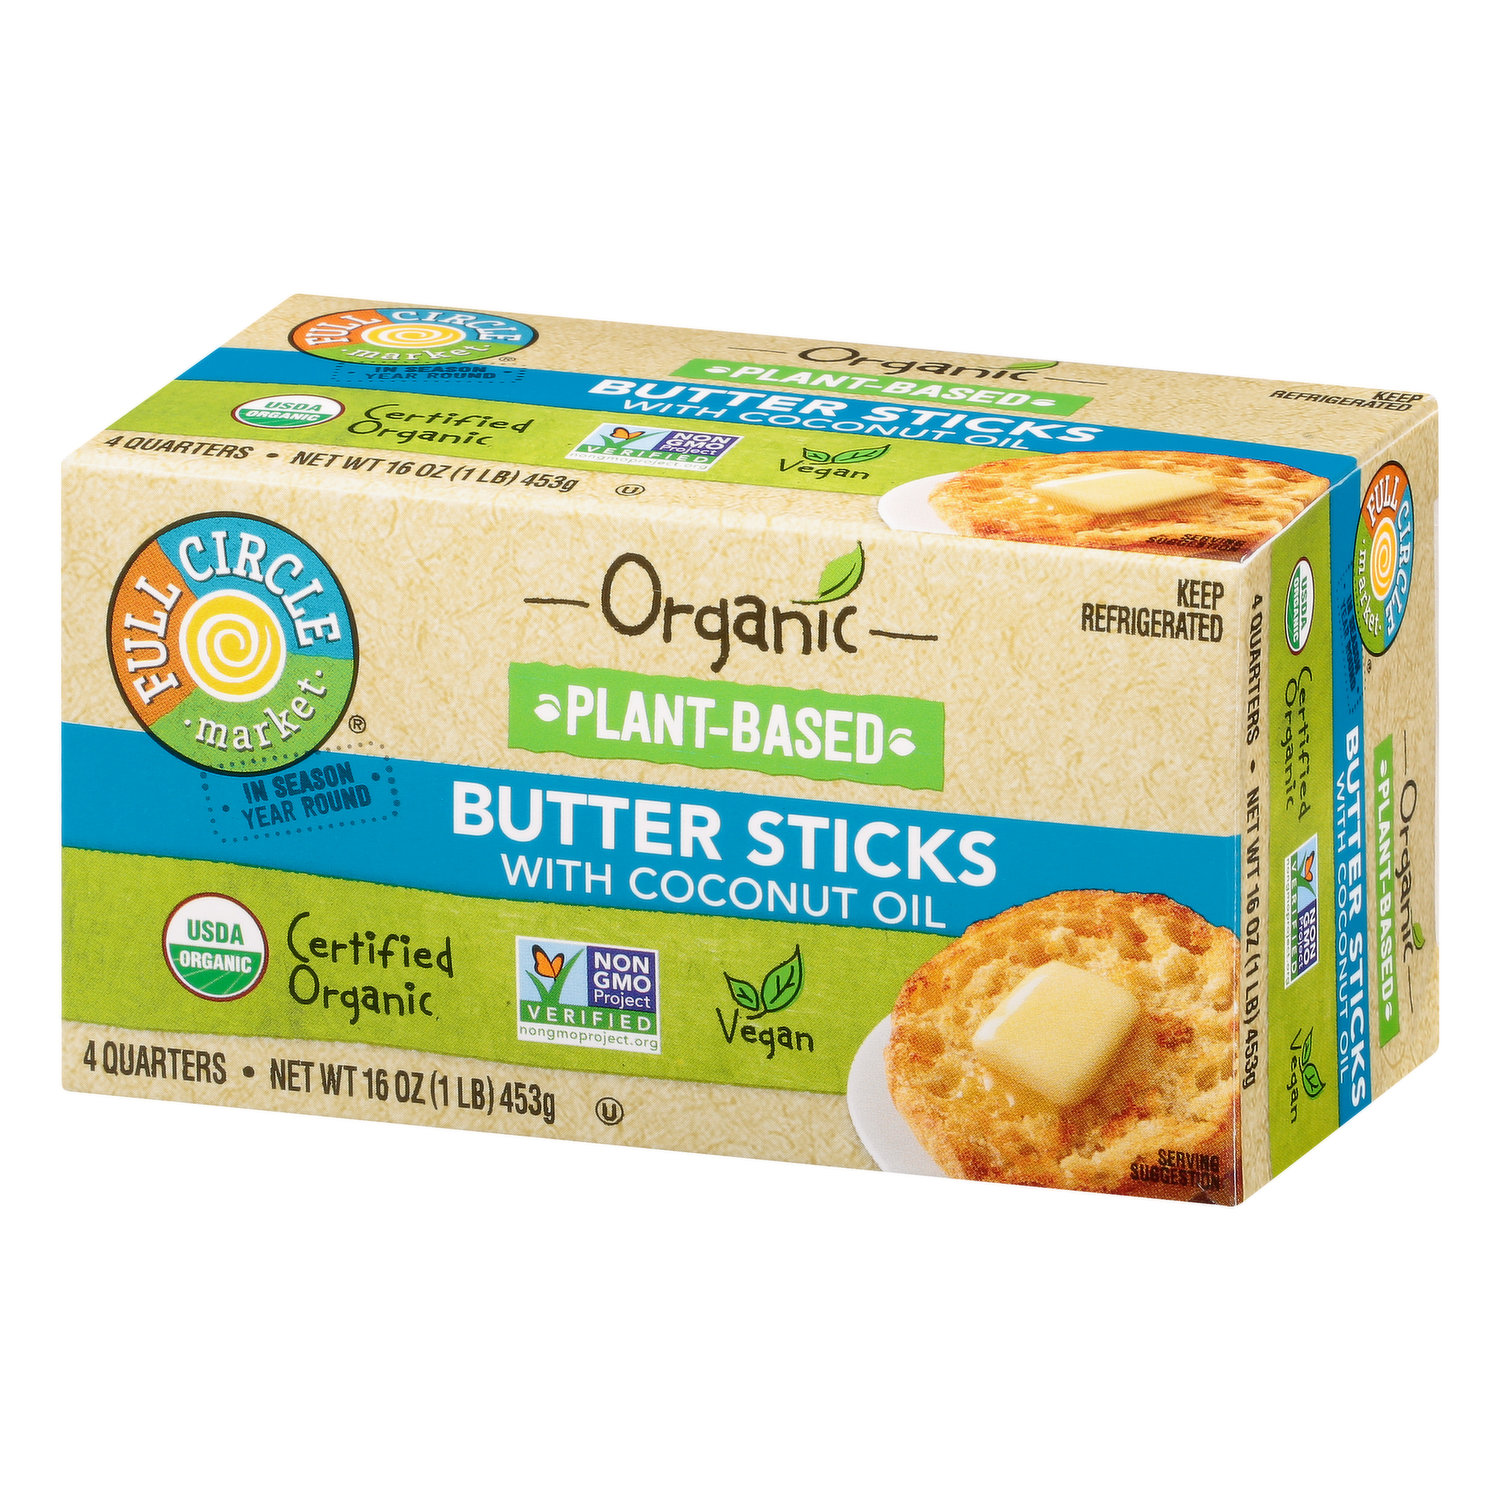 Butter Sticks: Grease Sticks for Toast